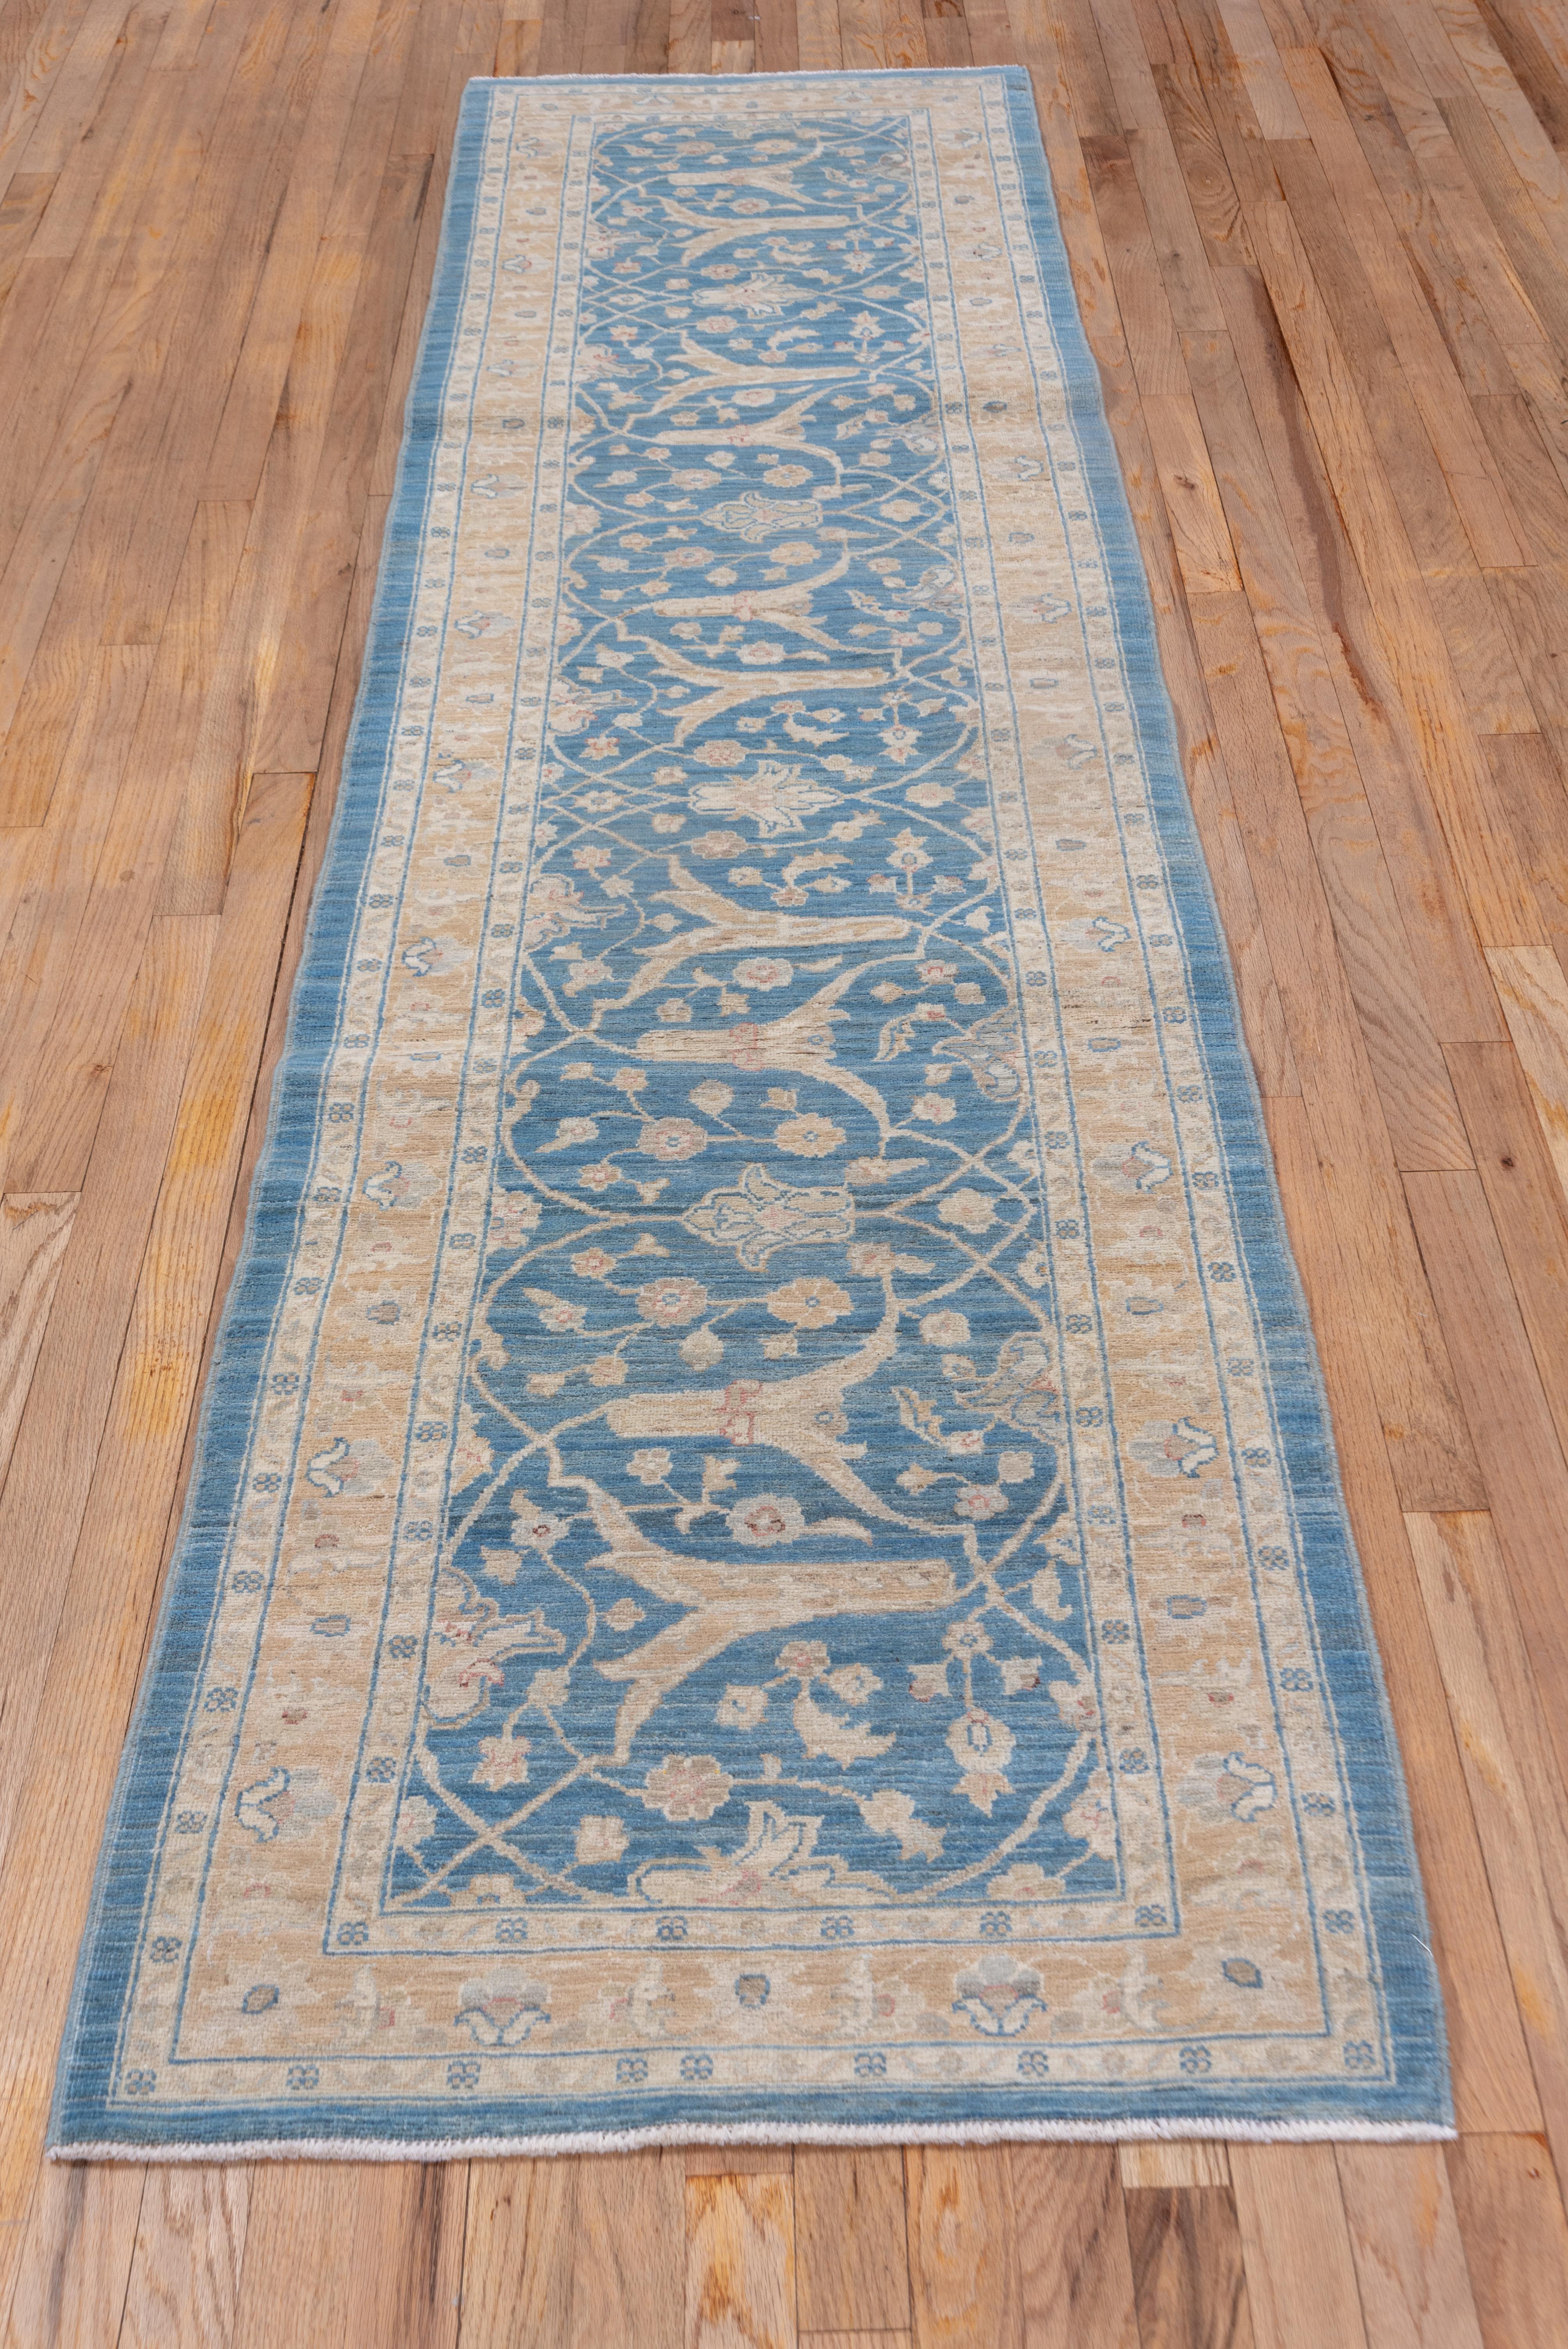 The light blue field has requisitioned a border with small escutcheon palmettes and larger forked arabesques and created a visually attractive runner. The yellow straw border features simple palmettes. The use of a border section for a runner is